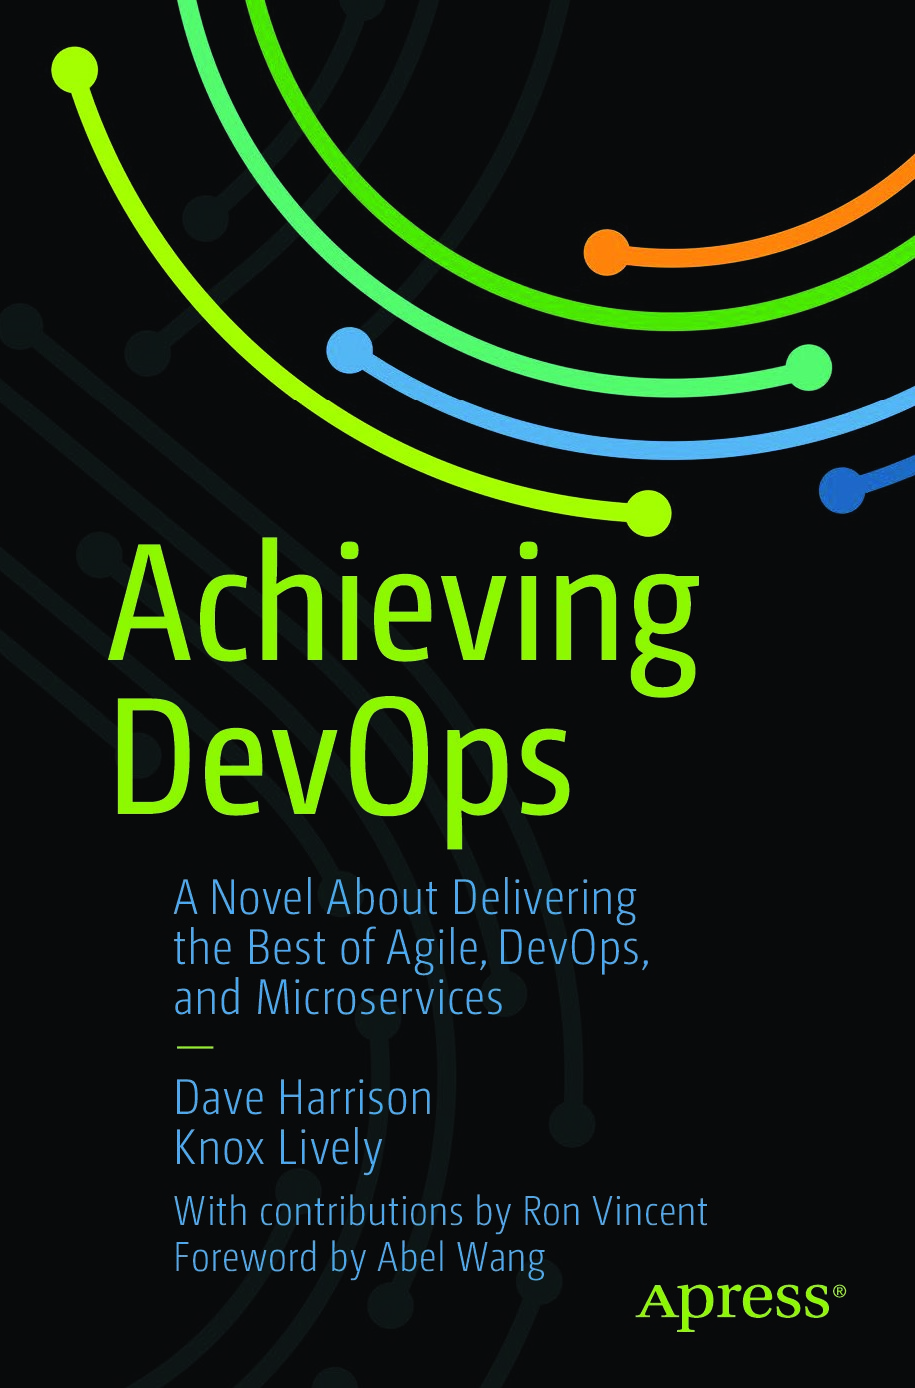 Achieving DevOps: A Novel About Delivering the Best of Agile, DevOps, and Microservices